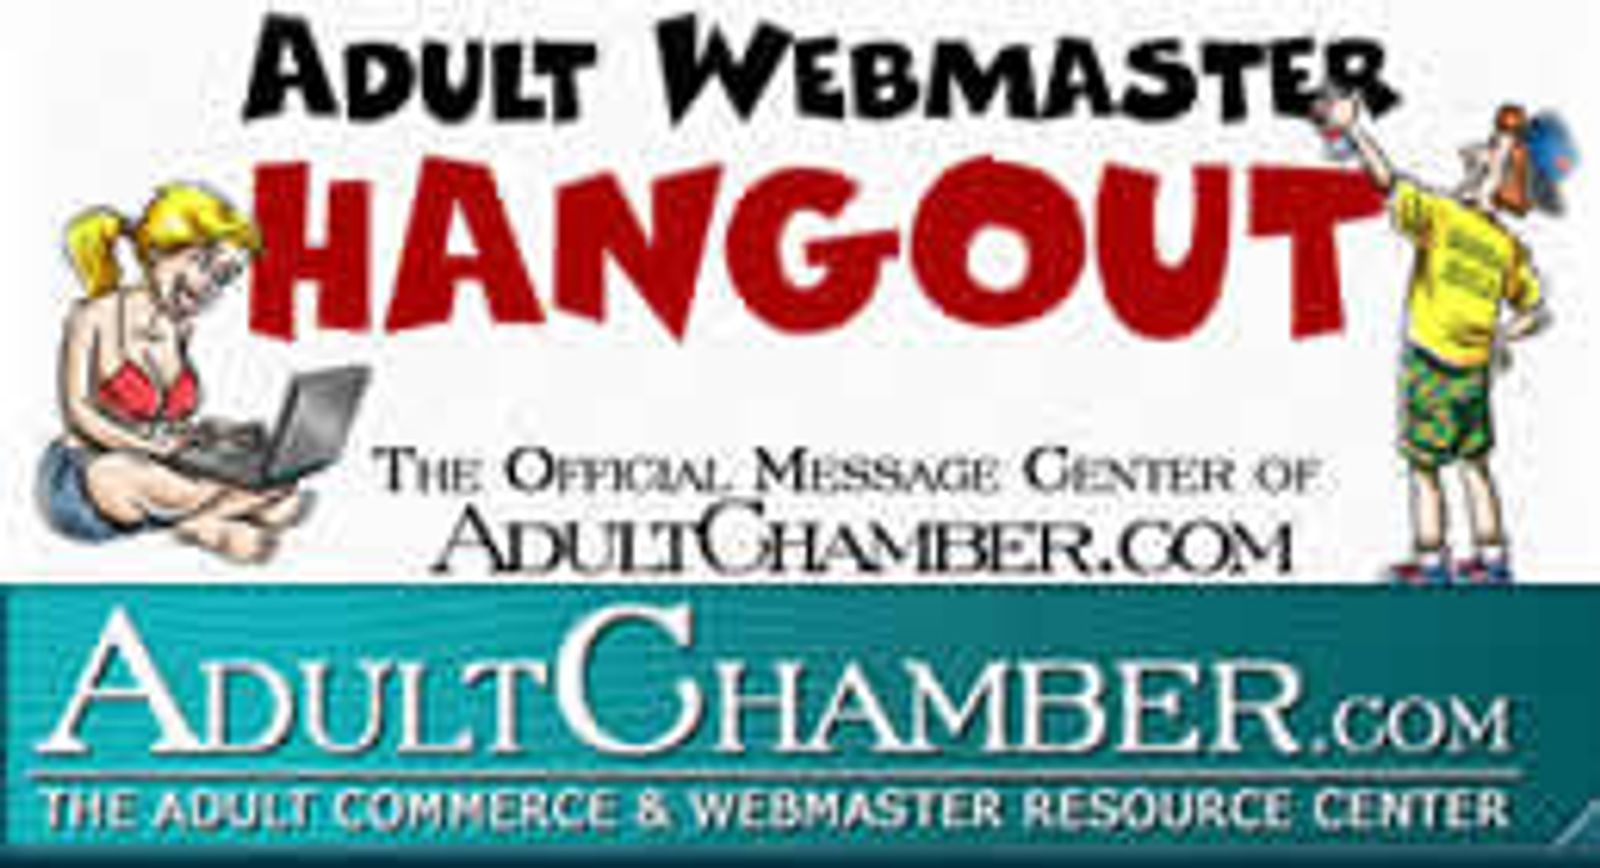 AdultChamber.com Blows Up: Launches New Site Design & Features